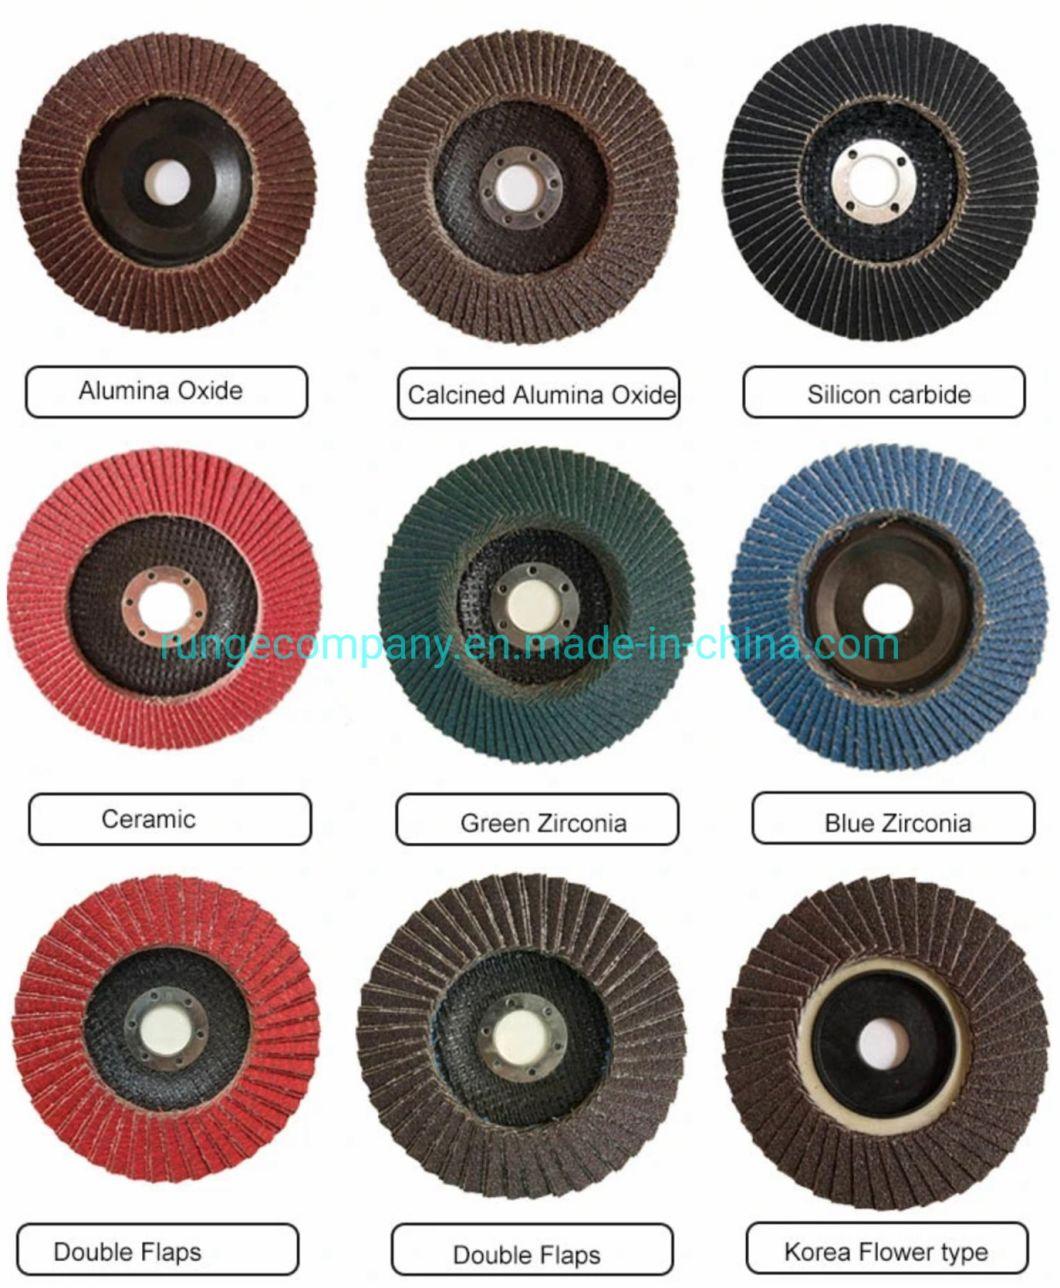 Power Electric Tools Accessories 350mm Chop Saw Wheel, 14 Inch Aluminum Oxide Flat Abrasive Cutting Disc Wheels